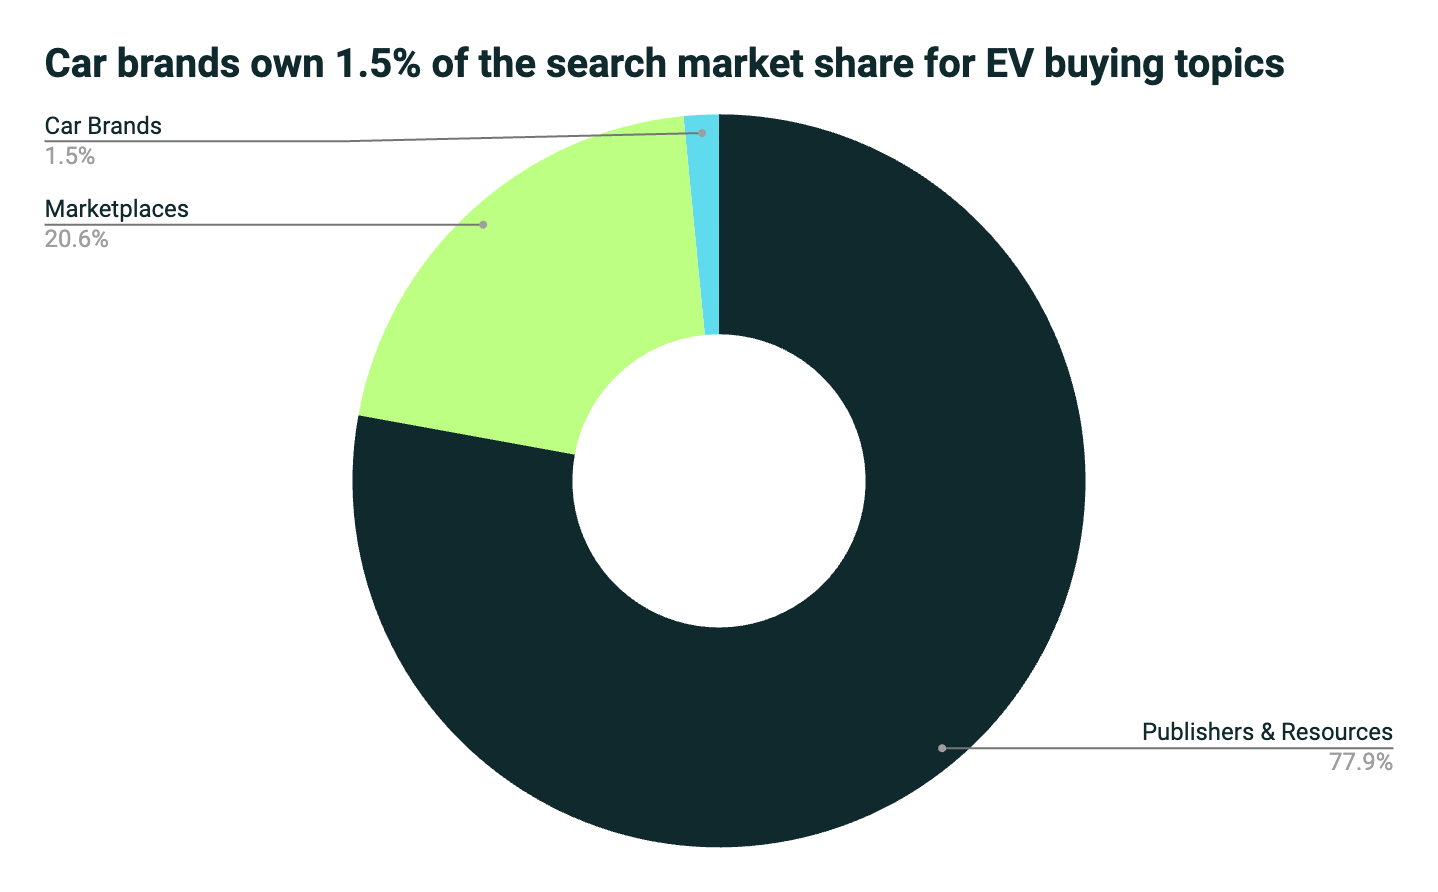 graph showing car brands own 1.5% of search market share for EV buying topics